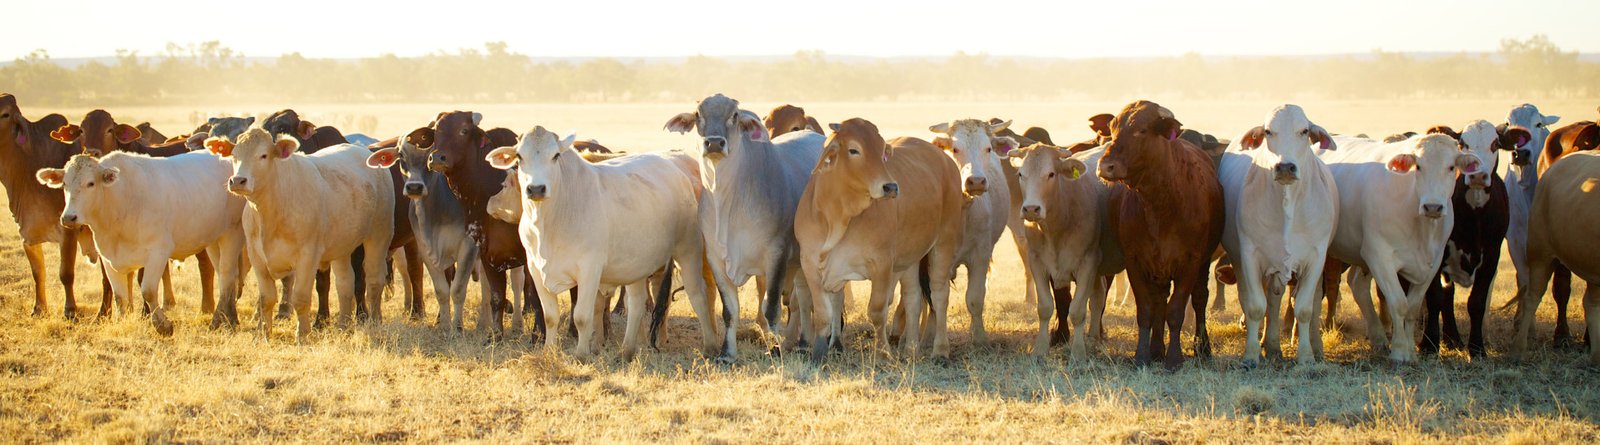 Feed Sources - Beef Cattle Image